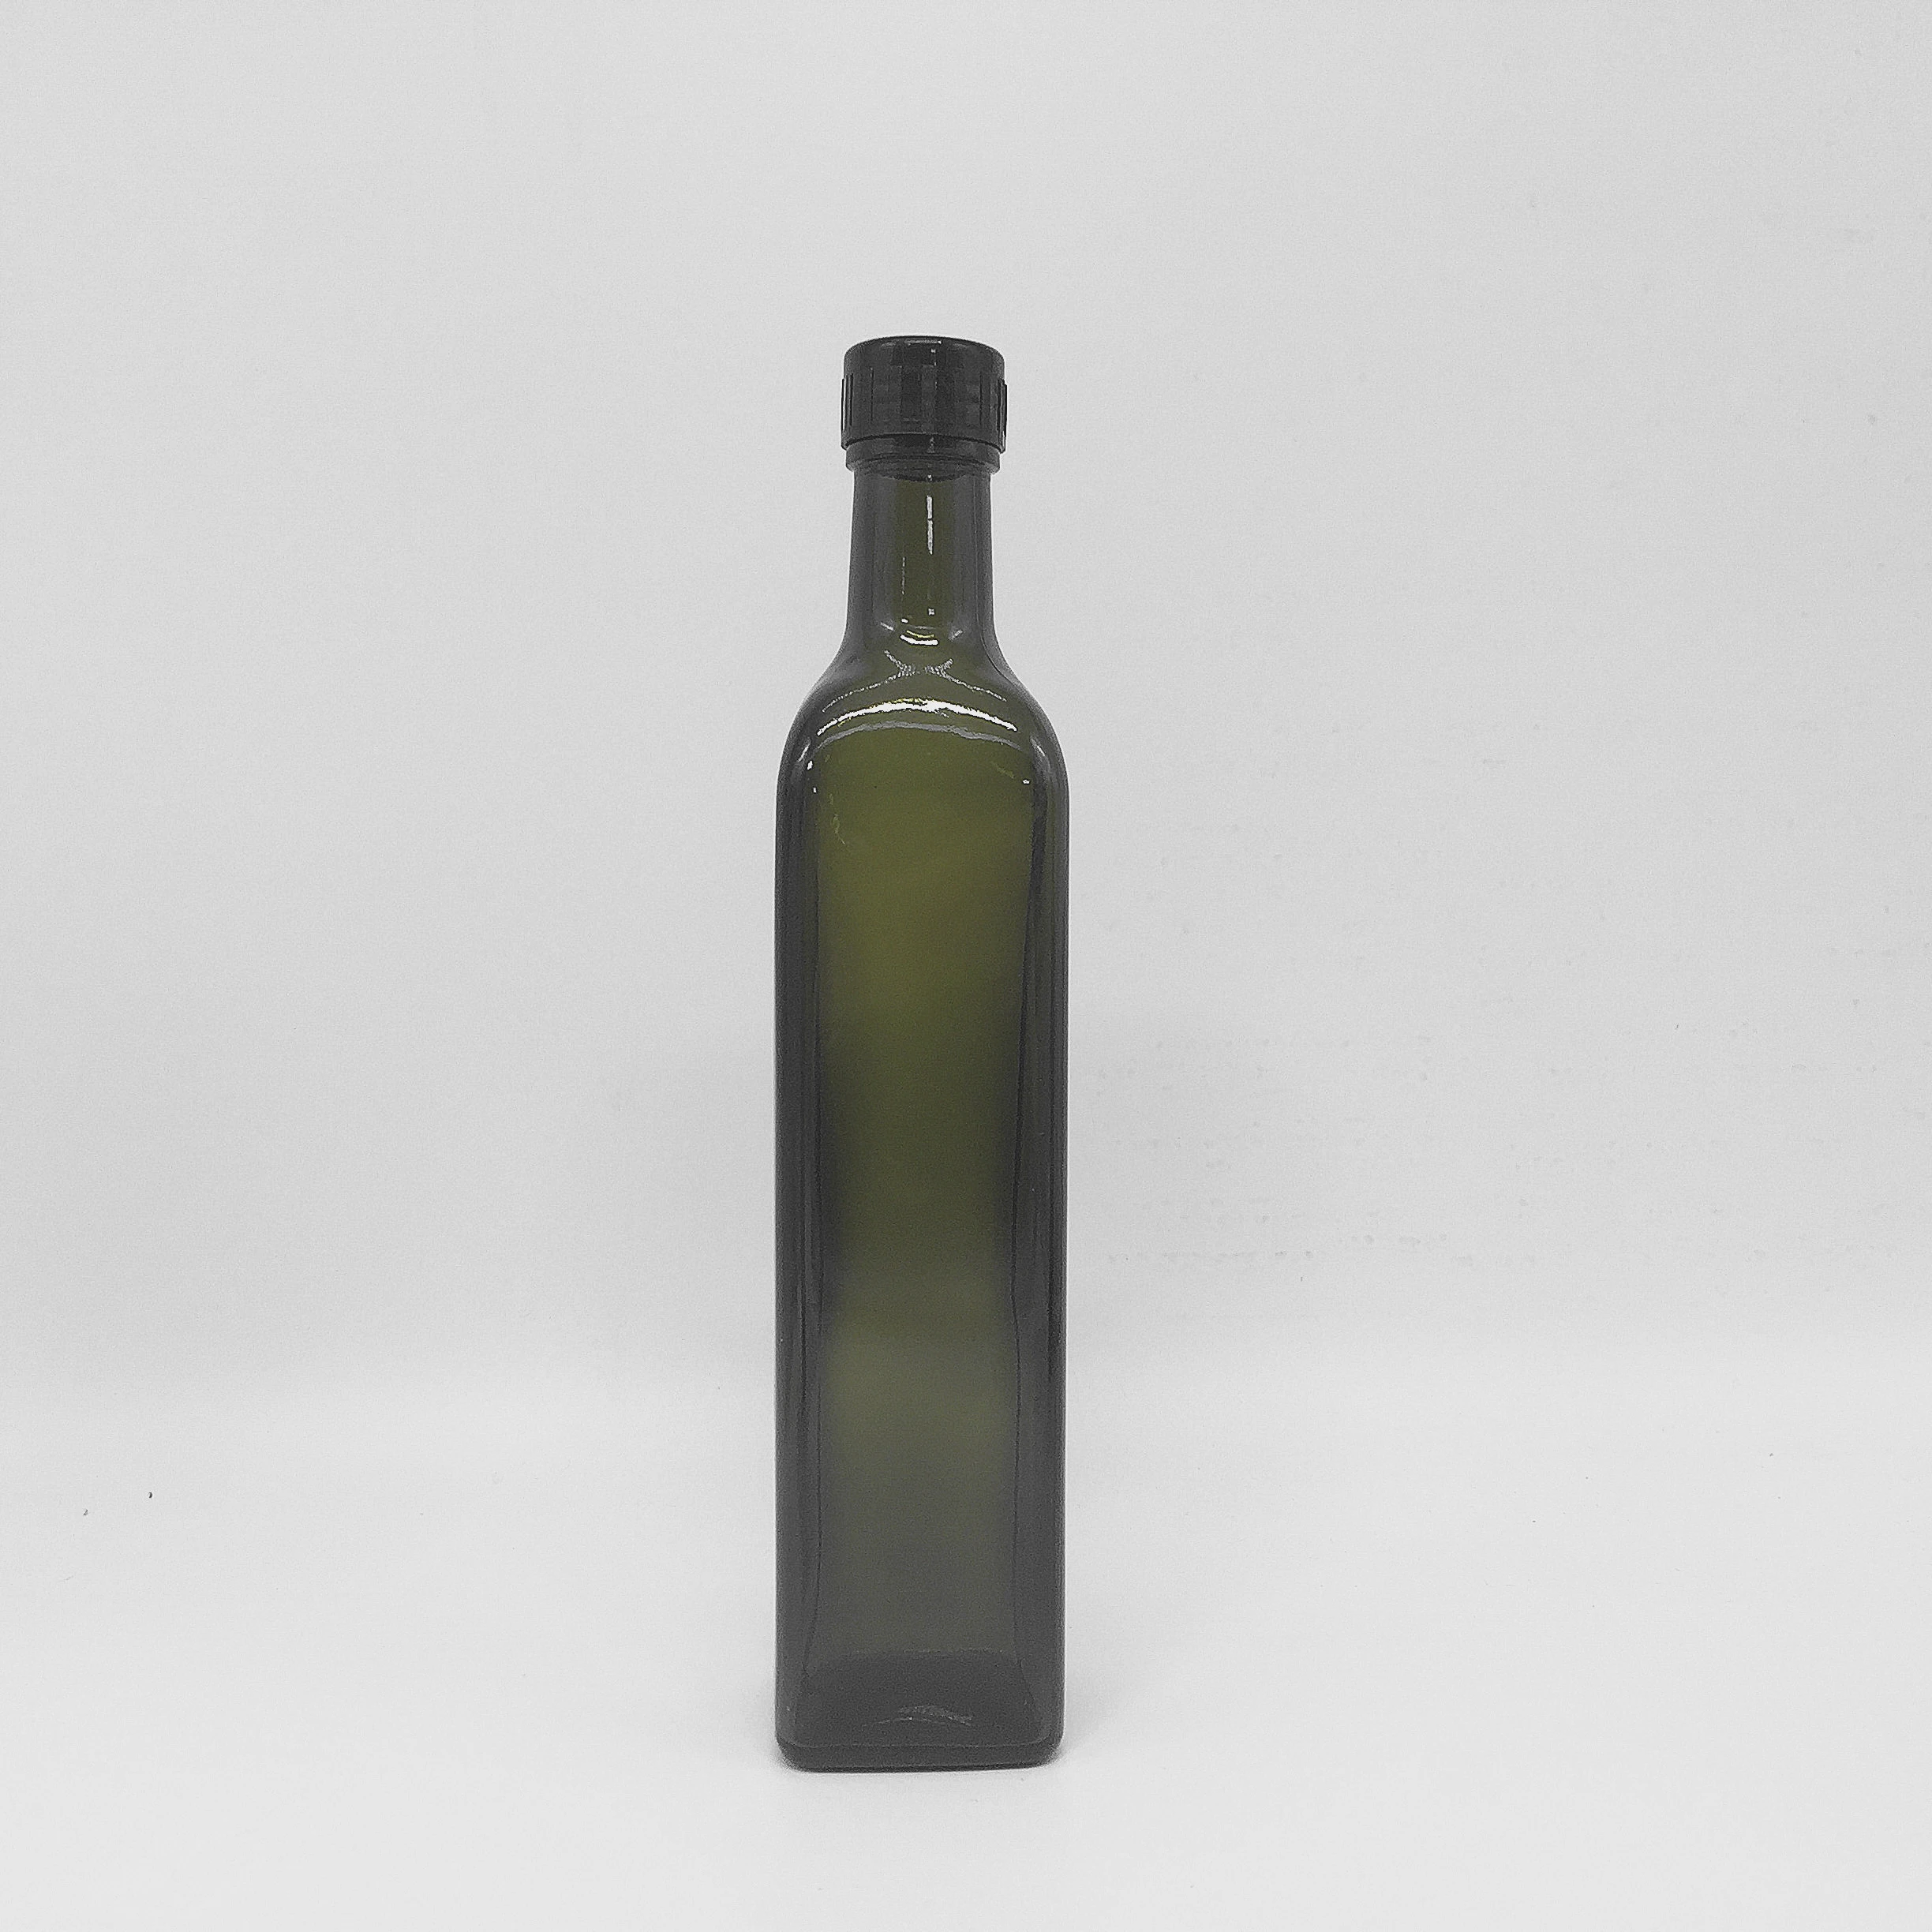 Empty Glass Olive Oil Bottle Clear And Dark Green Color 100ML 250ML 500ML 750ML 1000ML With Lid